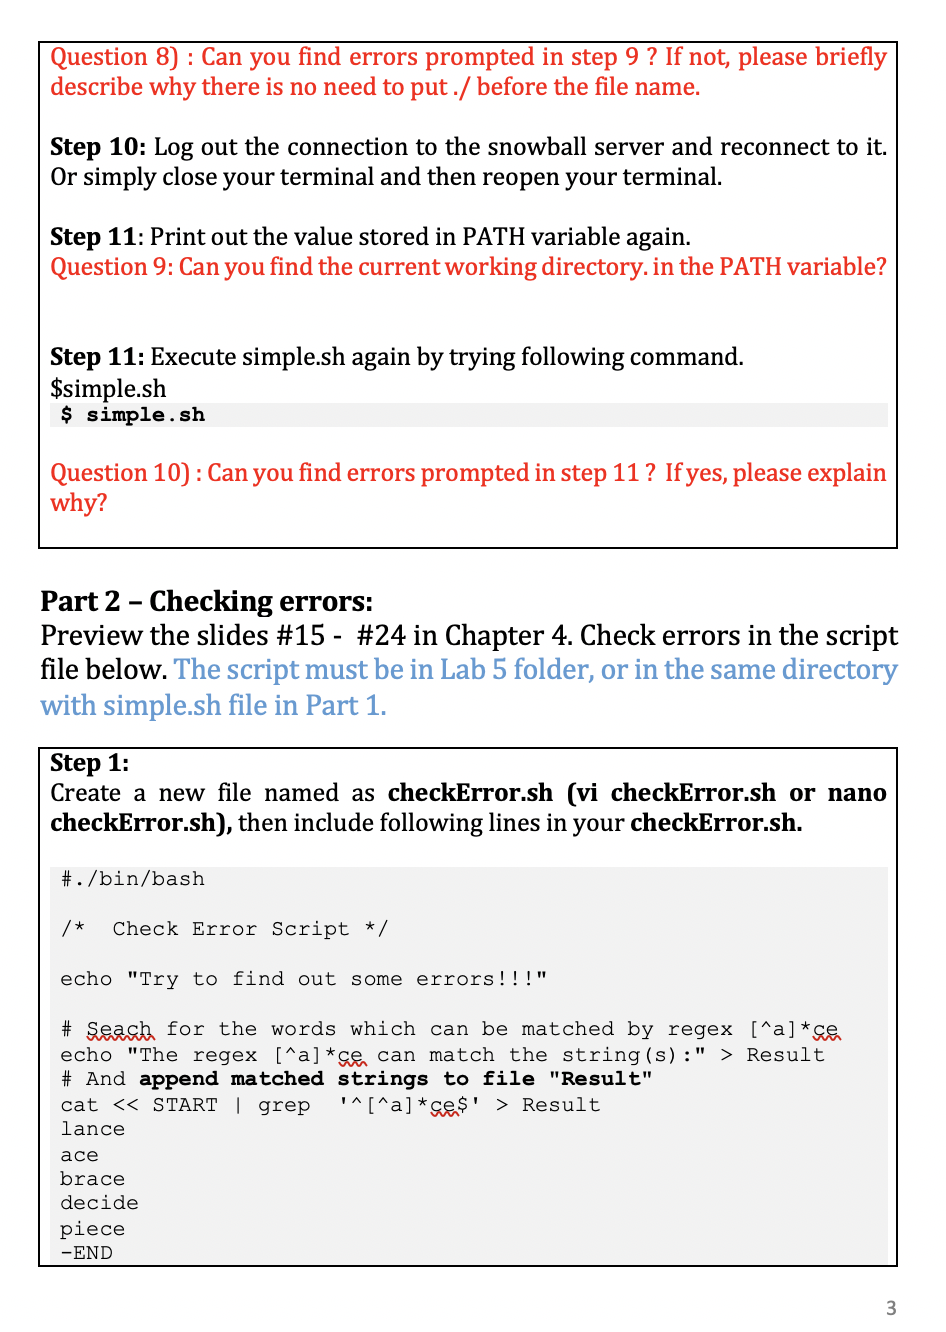 Check for Syntax Errors: Review the script for any syntax errors that may be causing issues.
Verify File Path: Ensure that the correct file path is specified in the script to locate the EXE file.